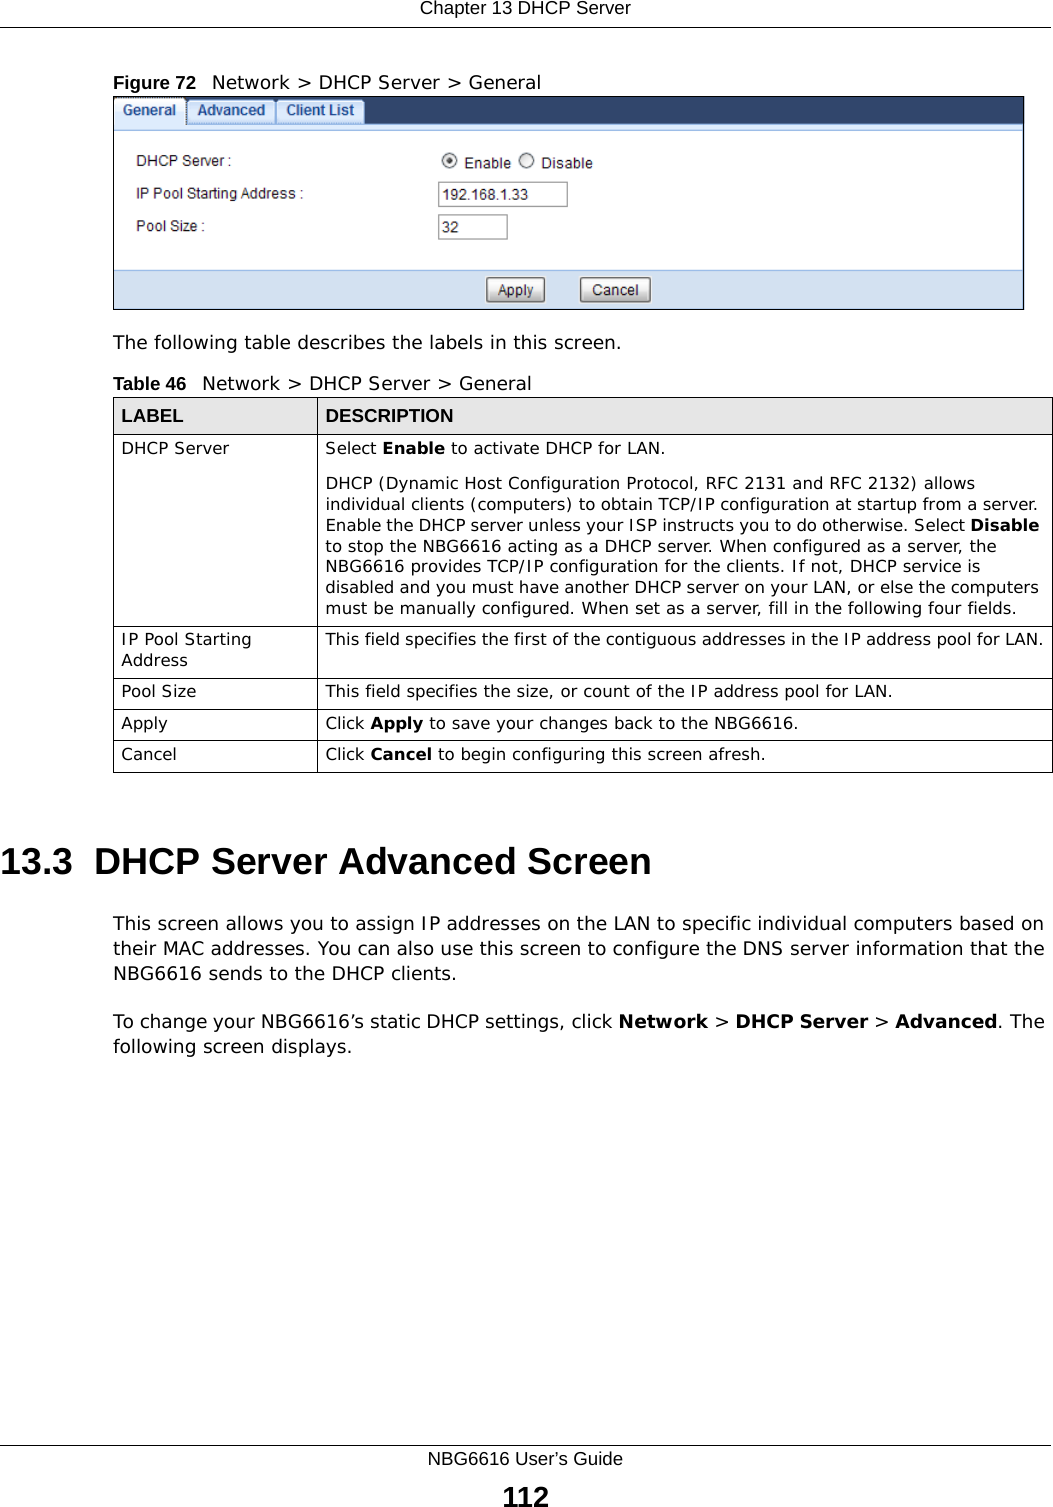 Chapter 13 DHCP ServerNBG6616 User’s Guide112Figure 72   Network &gt; DHCP Server &gt; General   The following table describes the labels in this screen.13.3  DHCP Server Advanced Screen    This screen allows you to assign IP addresses on the LAN to specific individual computers based on their MAC addresses. You can also use this screen to configure the DNS server information that the NBG6616 sends to the DHCP clients.To change your NBG6616’s static DHCP settings, click Network &gt; DHCP Server &gt; Advanced. The following screen displays.Table 46   Network &gt; DHCP Server &gt; General  LABEL DESCRIPTIONDHCP Server Select Enable to activate DHCP for LAN.DHCP (Dynamic Host Configuration Protocol, RFC 2131 and RFC 2132) allows individual clients (computers) to obtain TCP/IP configuration at startup from a server. Enable the DHCP server unless your ISP instructs you to do otherwise. Select Disable to stop the NBG6616 acting as a DHCP server. When configured as a server, the NBG6616 provides TCP/IP configuration for the clients. If not, DHCP service is disabled and you must have another DHCP server on your LAN, or else the computers must be manually configured. When set as a server, fill in the following four fields.IP Pool Starting Address This field specifies the first of the contiguous addresses in the IP address pool for LAN.Pool Size This field specifies the size, or count of the IP address pool for LAN.Apply Click Apply to save your changes back to the NBG6616.Cancel Click Cancel to begin configuring this screen afresh.